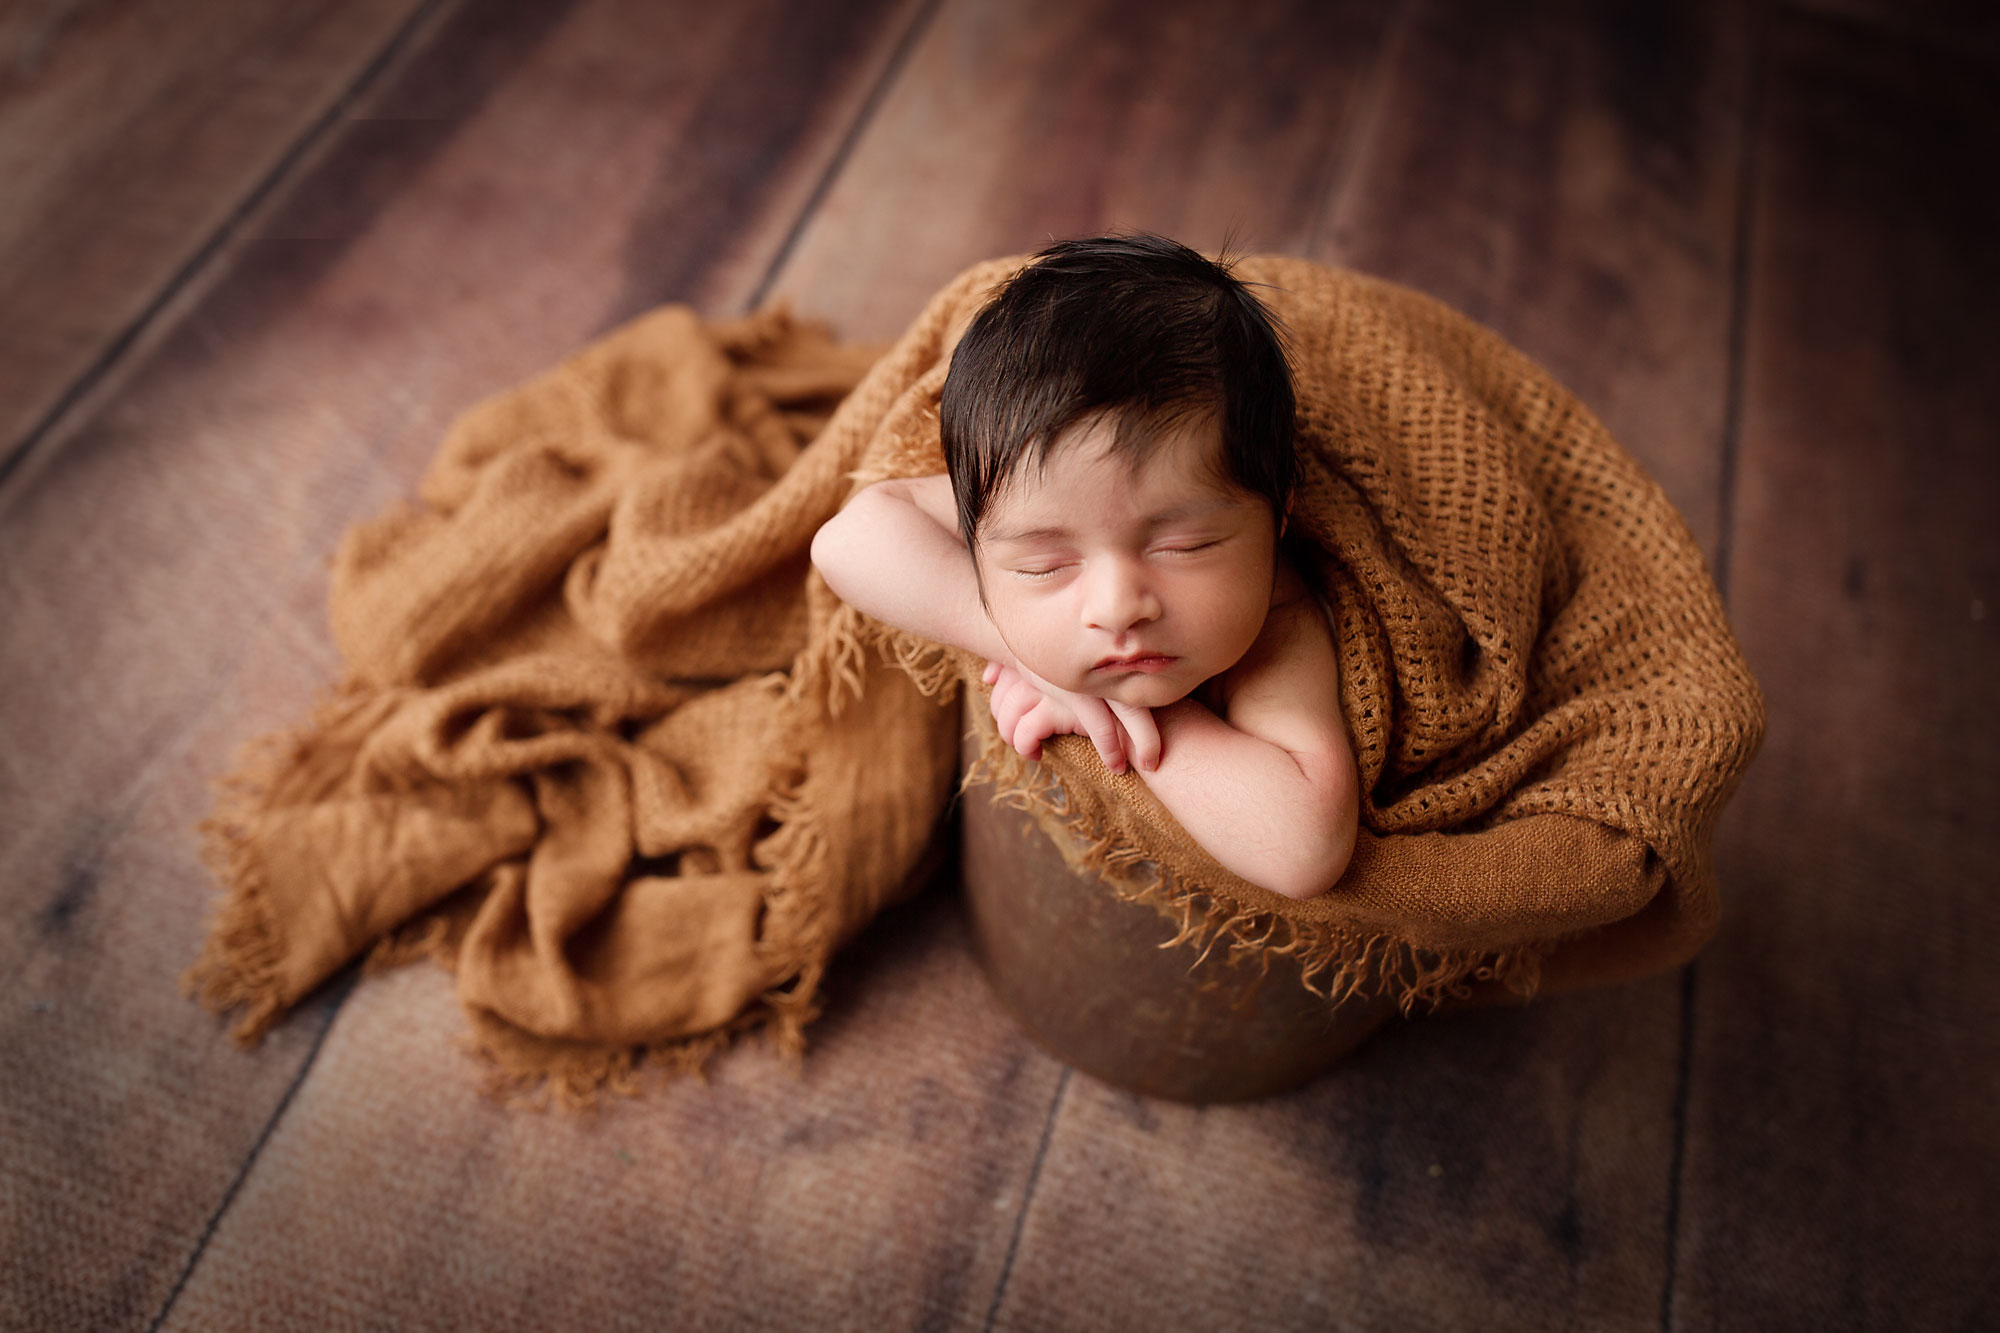 professional newborn photography near me, baby boy asleep in rustic bucket with wheat gold wrap against wooden floorboards